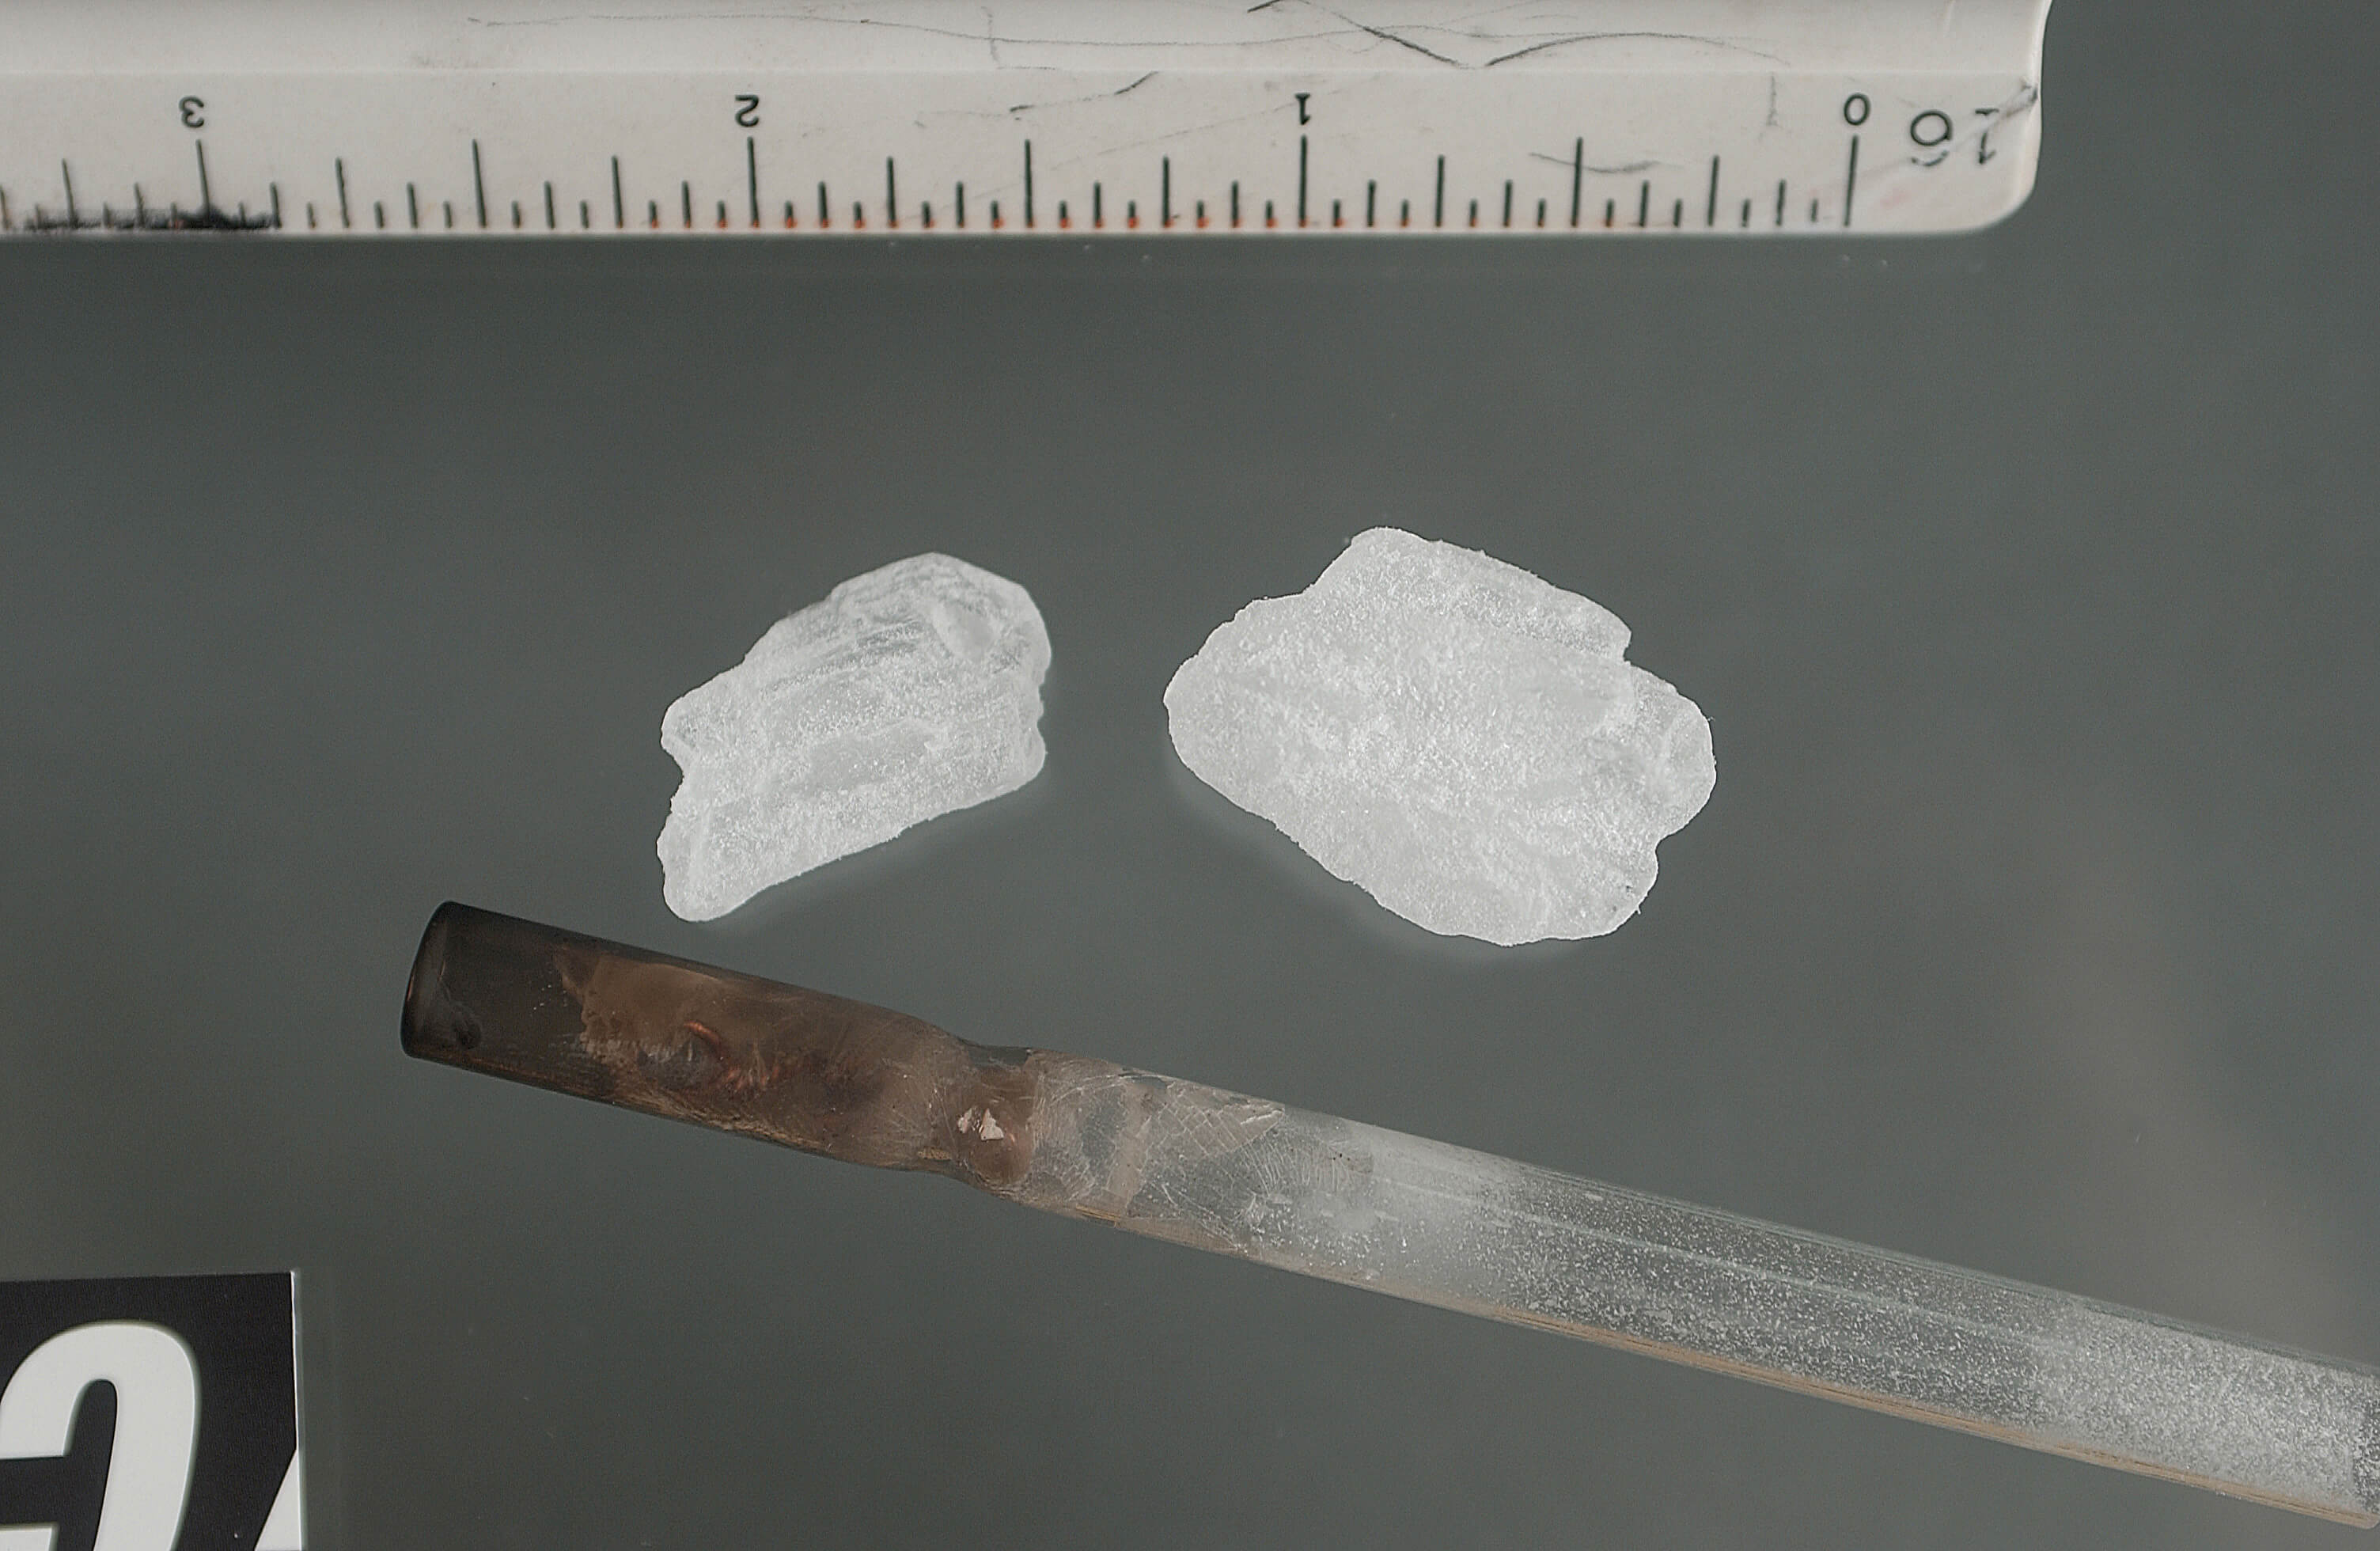 "ICE" Methamphetamine crystals with pipe.